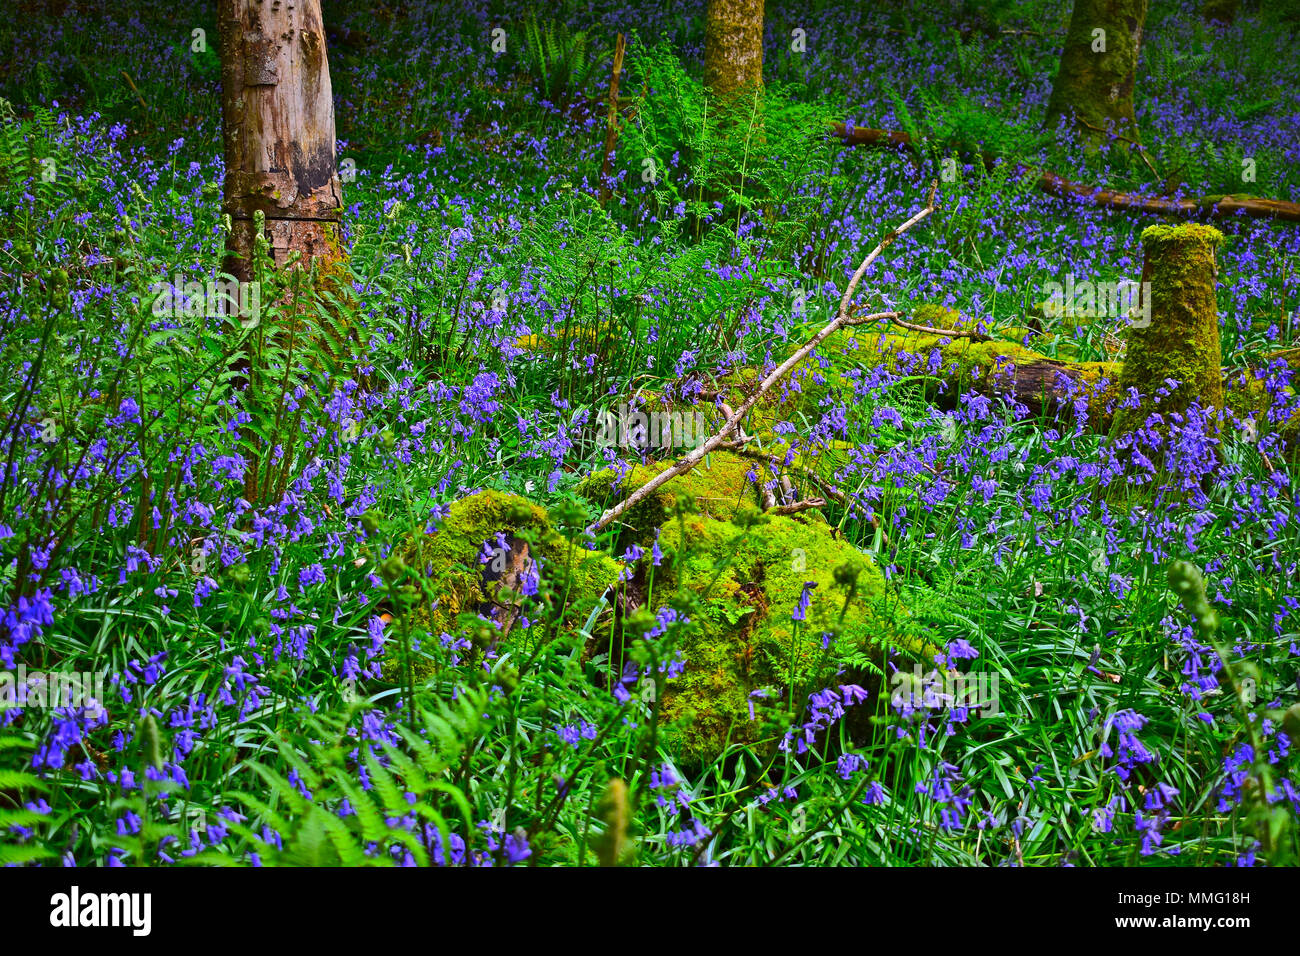 Bluebells in a pretty woodland setting. Stock Photo